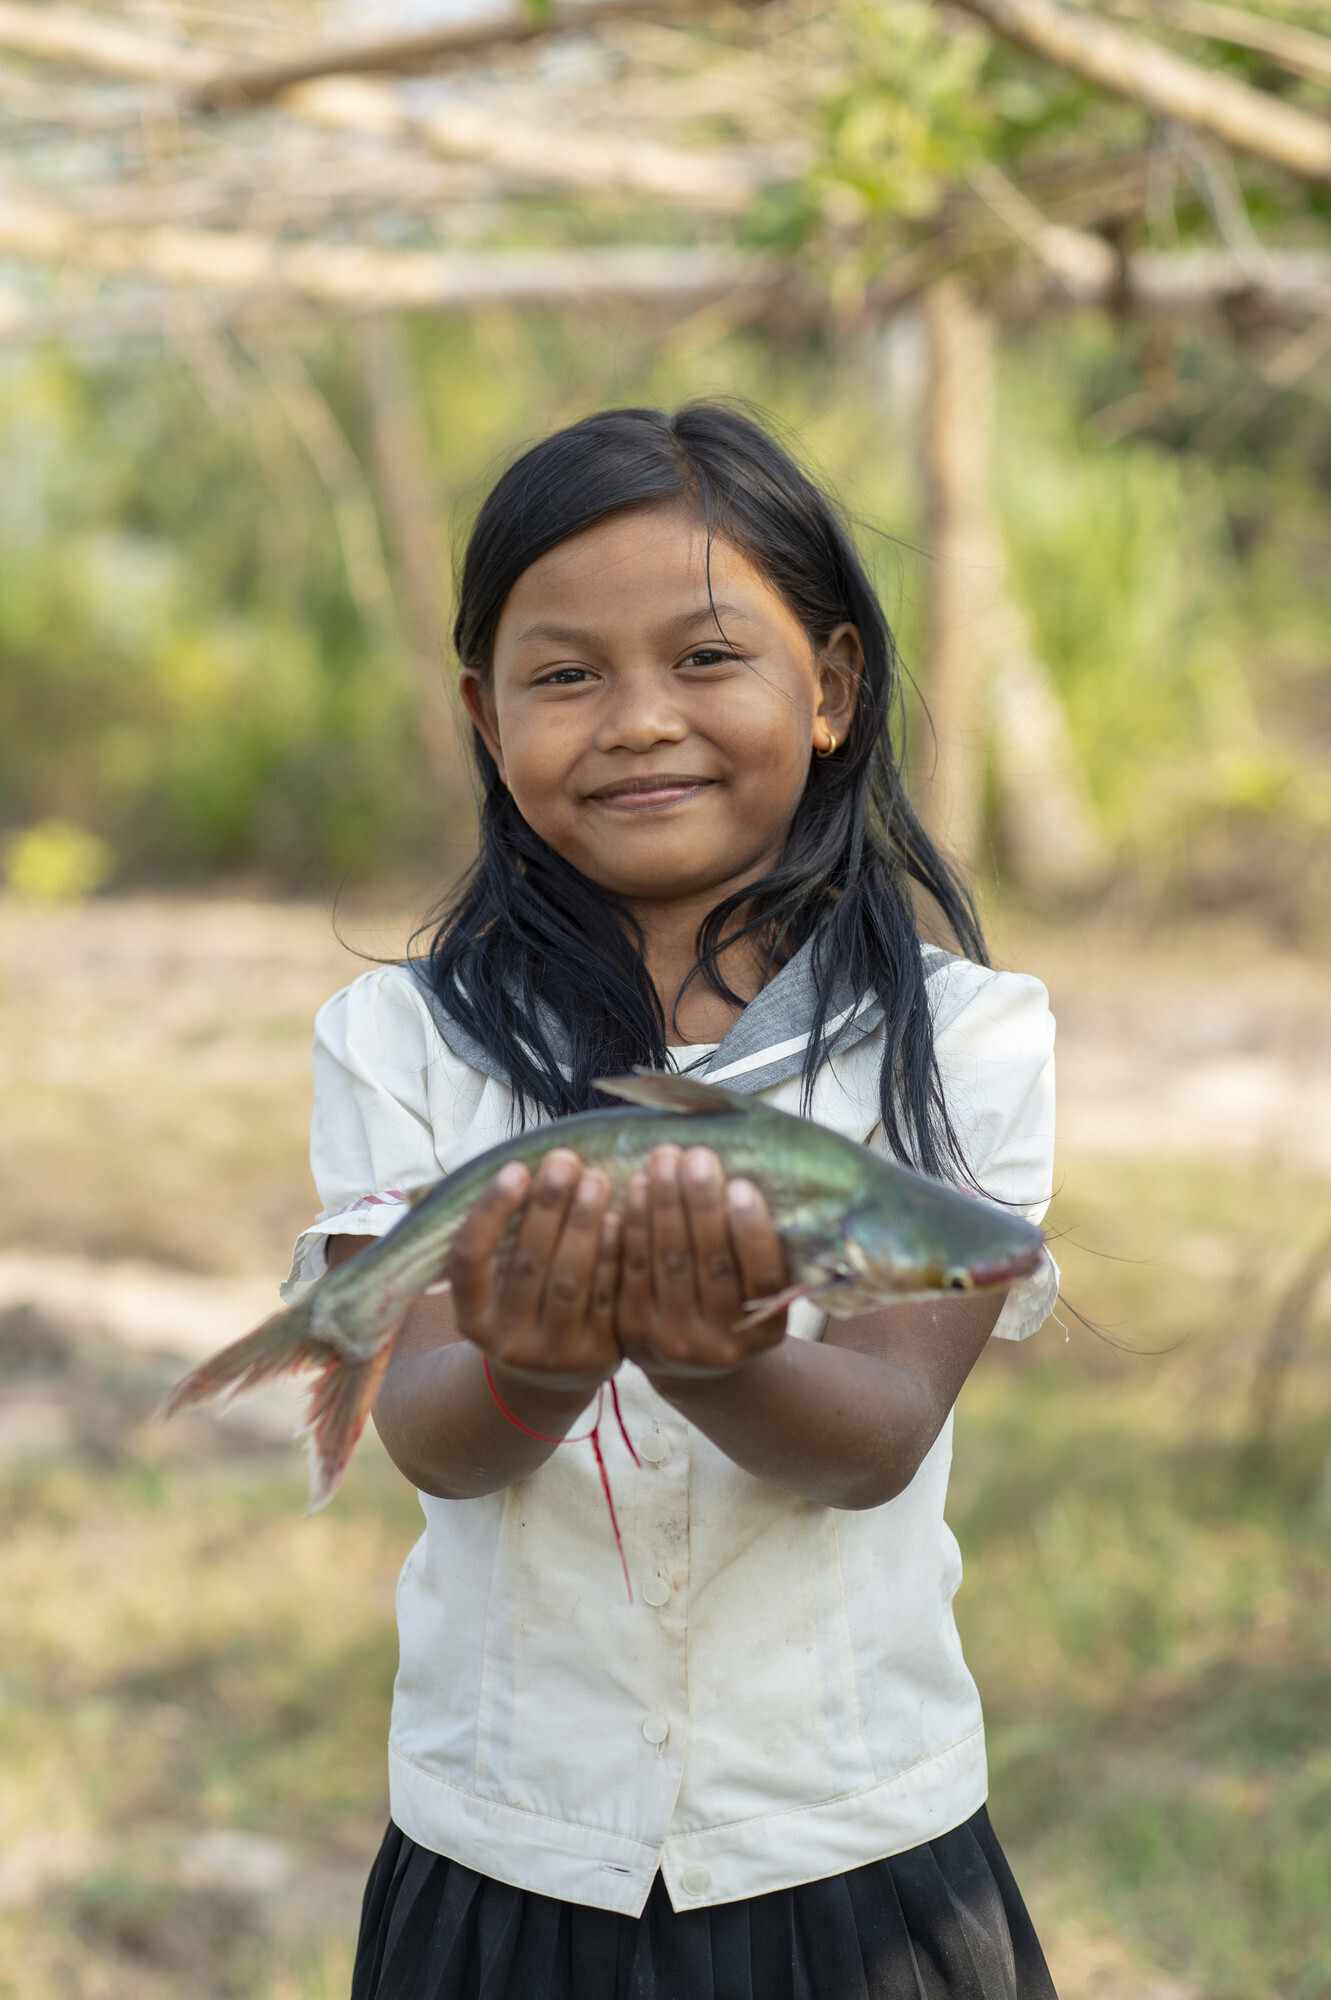 A portrait of a young Cambodian girl holding a fish